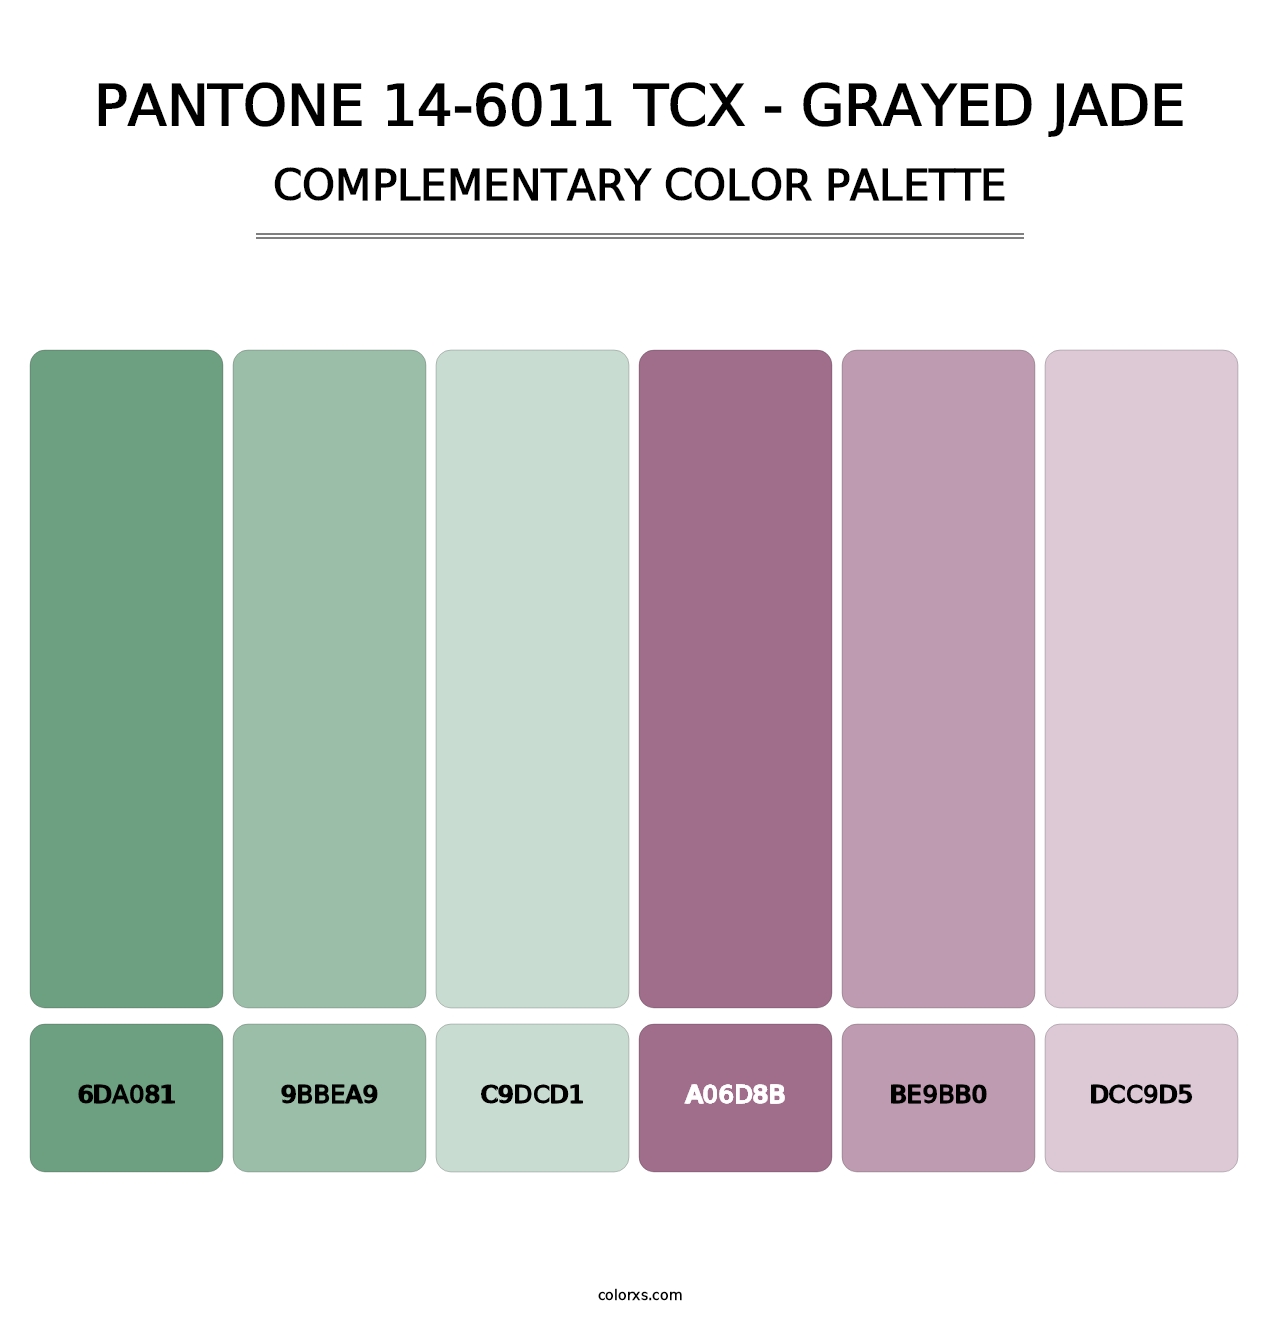 PANTONE 14-6011 TCX - Grayed Jade - Complementary Color Palette